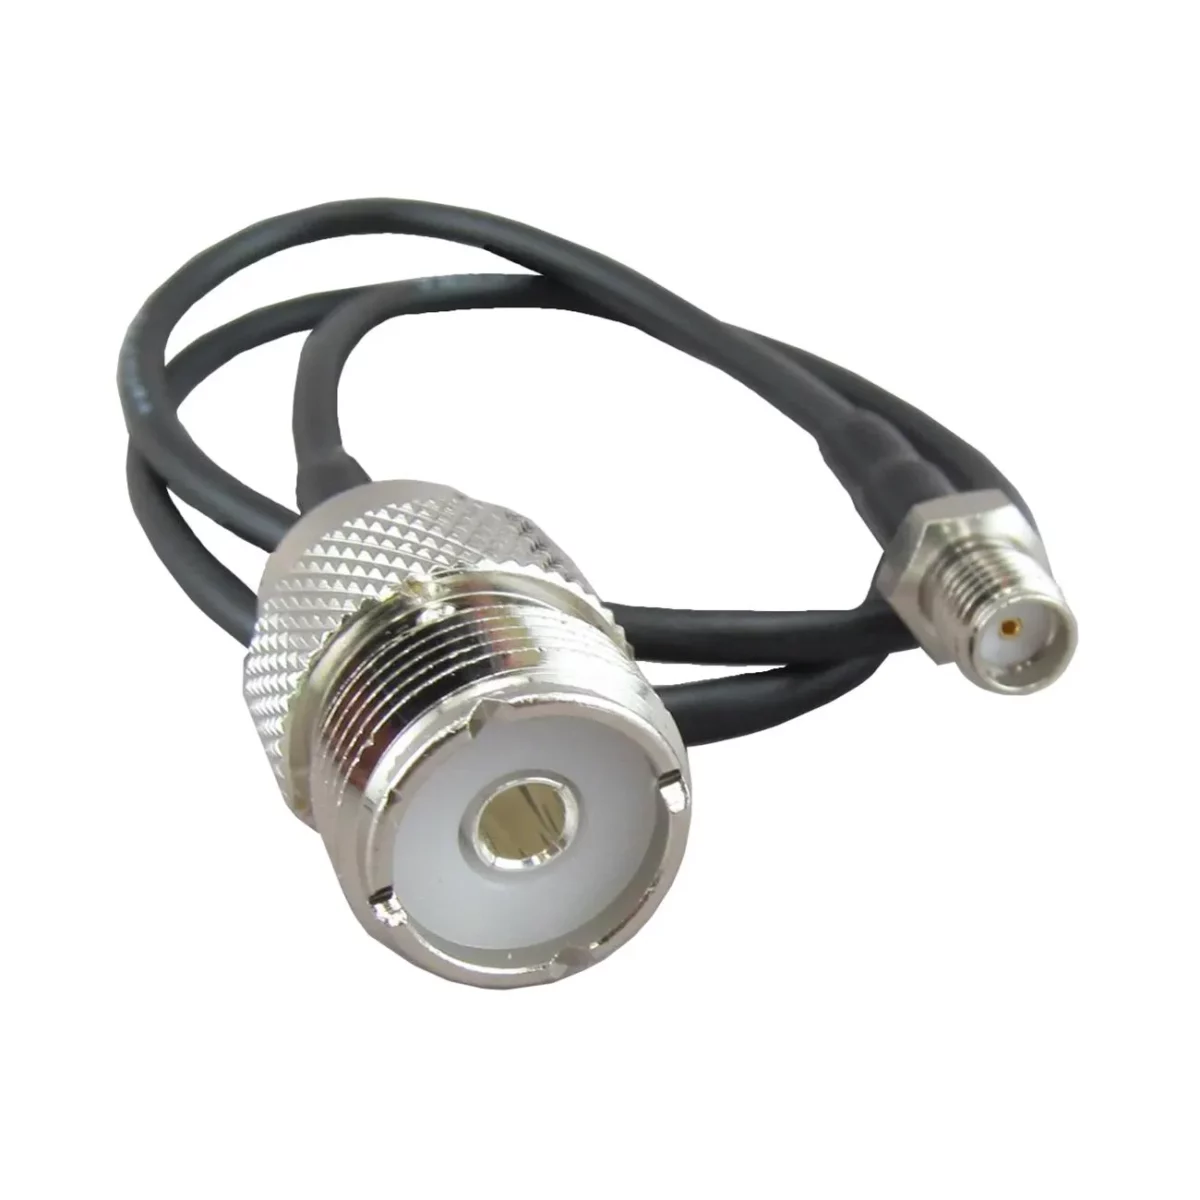 Comet HM-05JSJ adapter cable